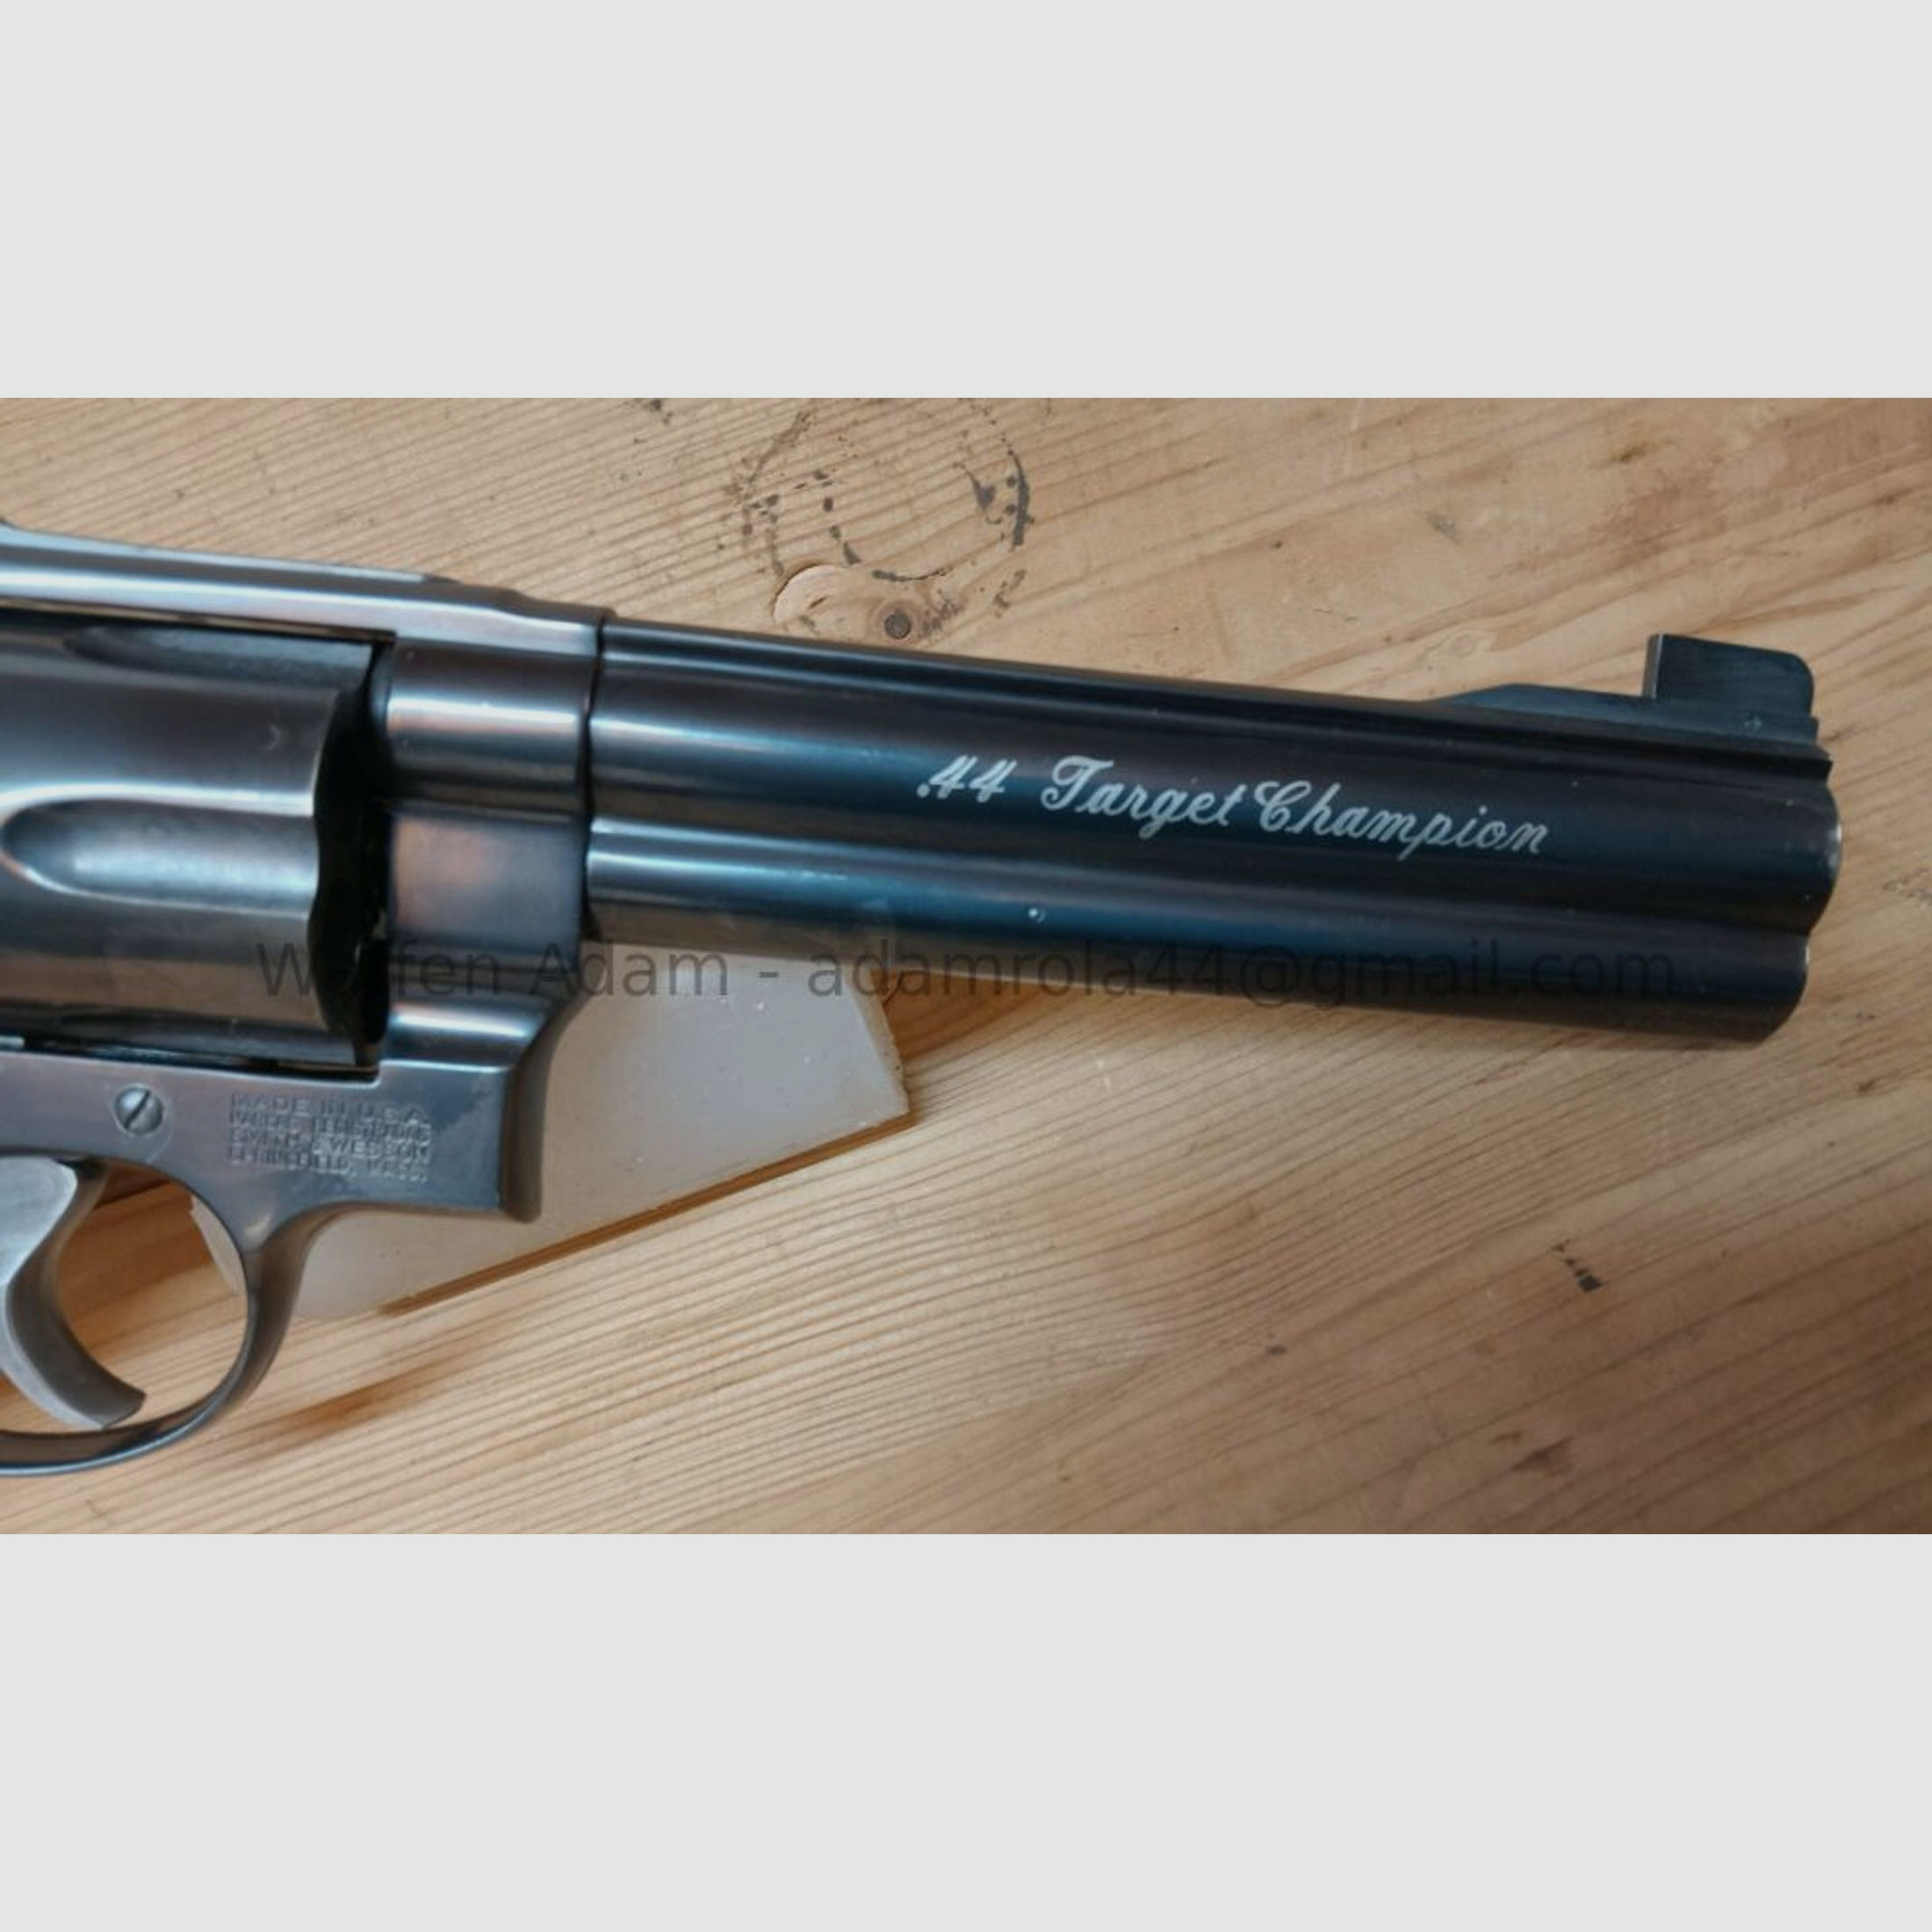 Smith & Wesson	 Modell 29-6 "Target Champion"